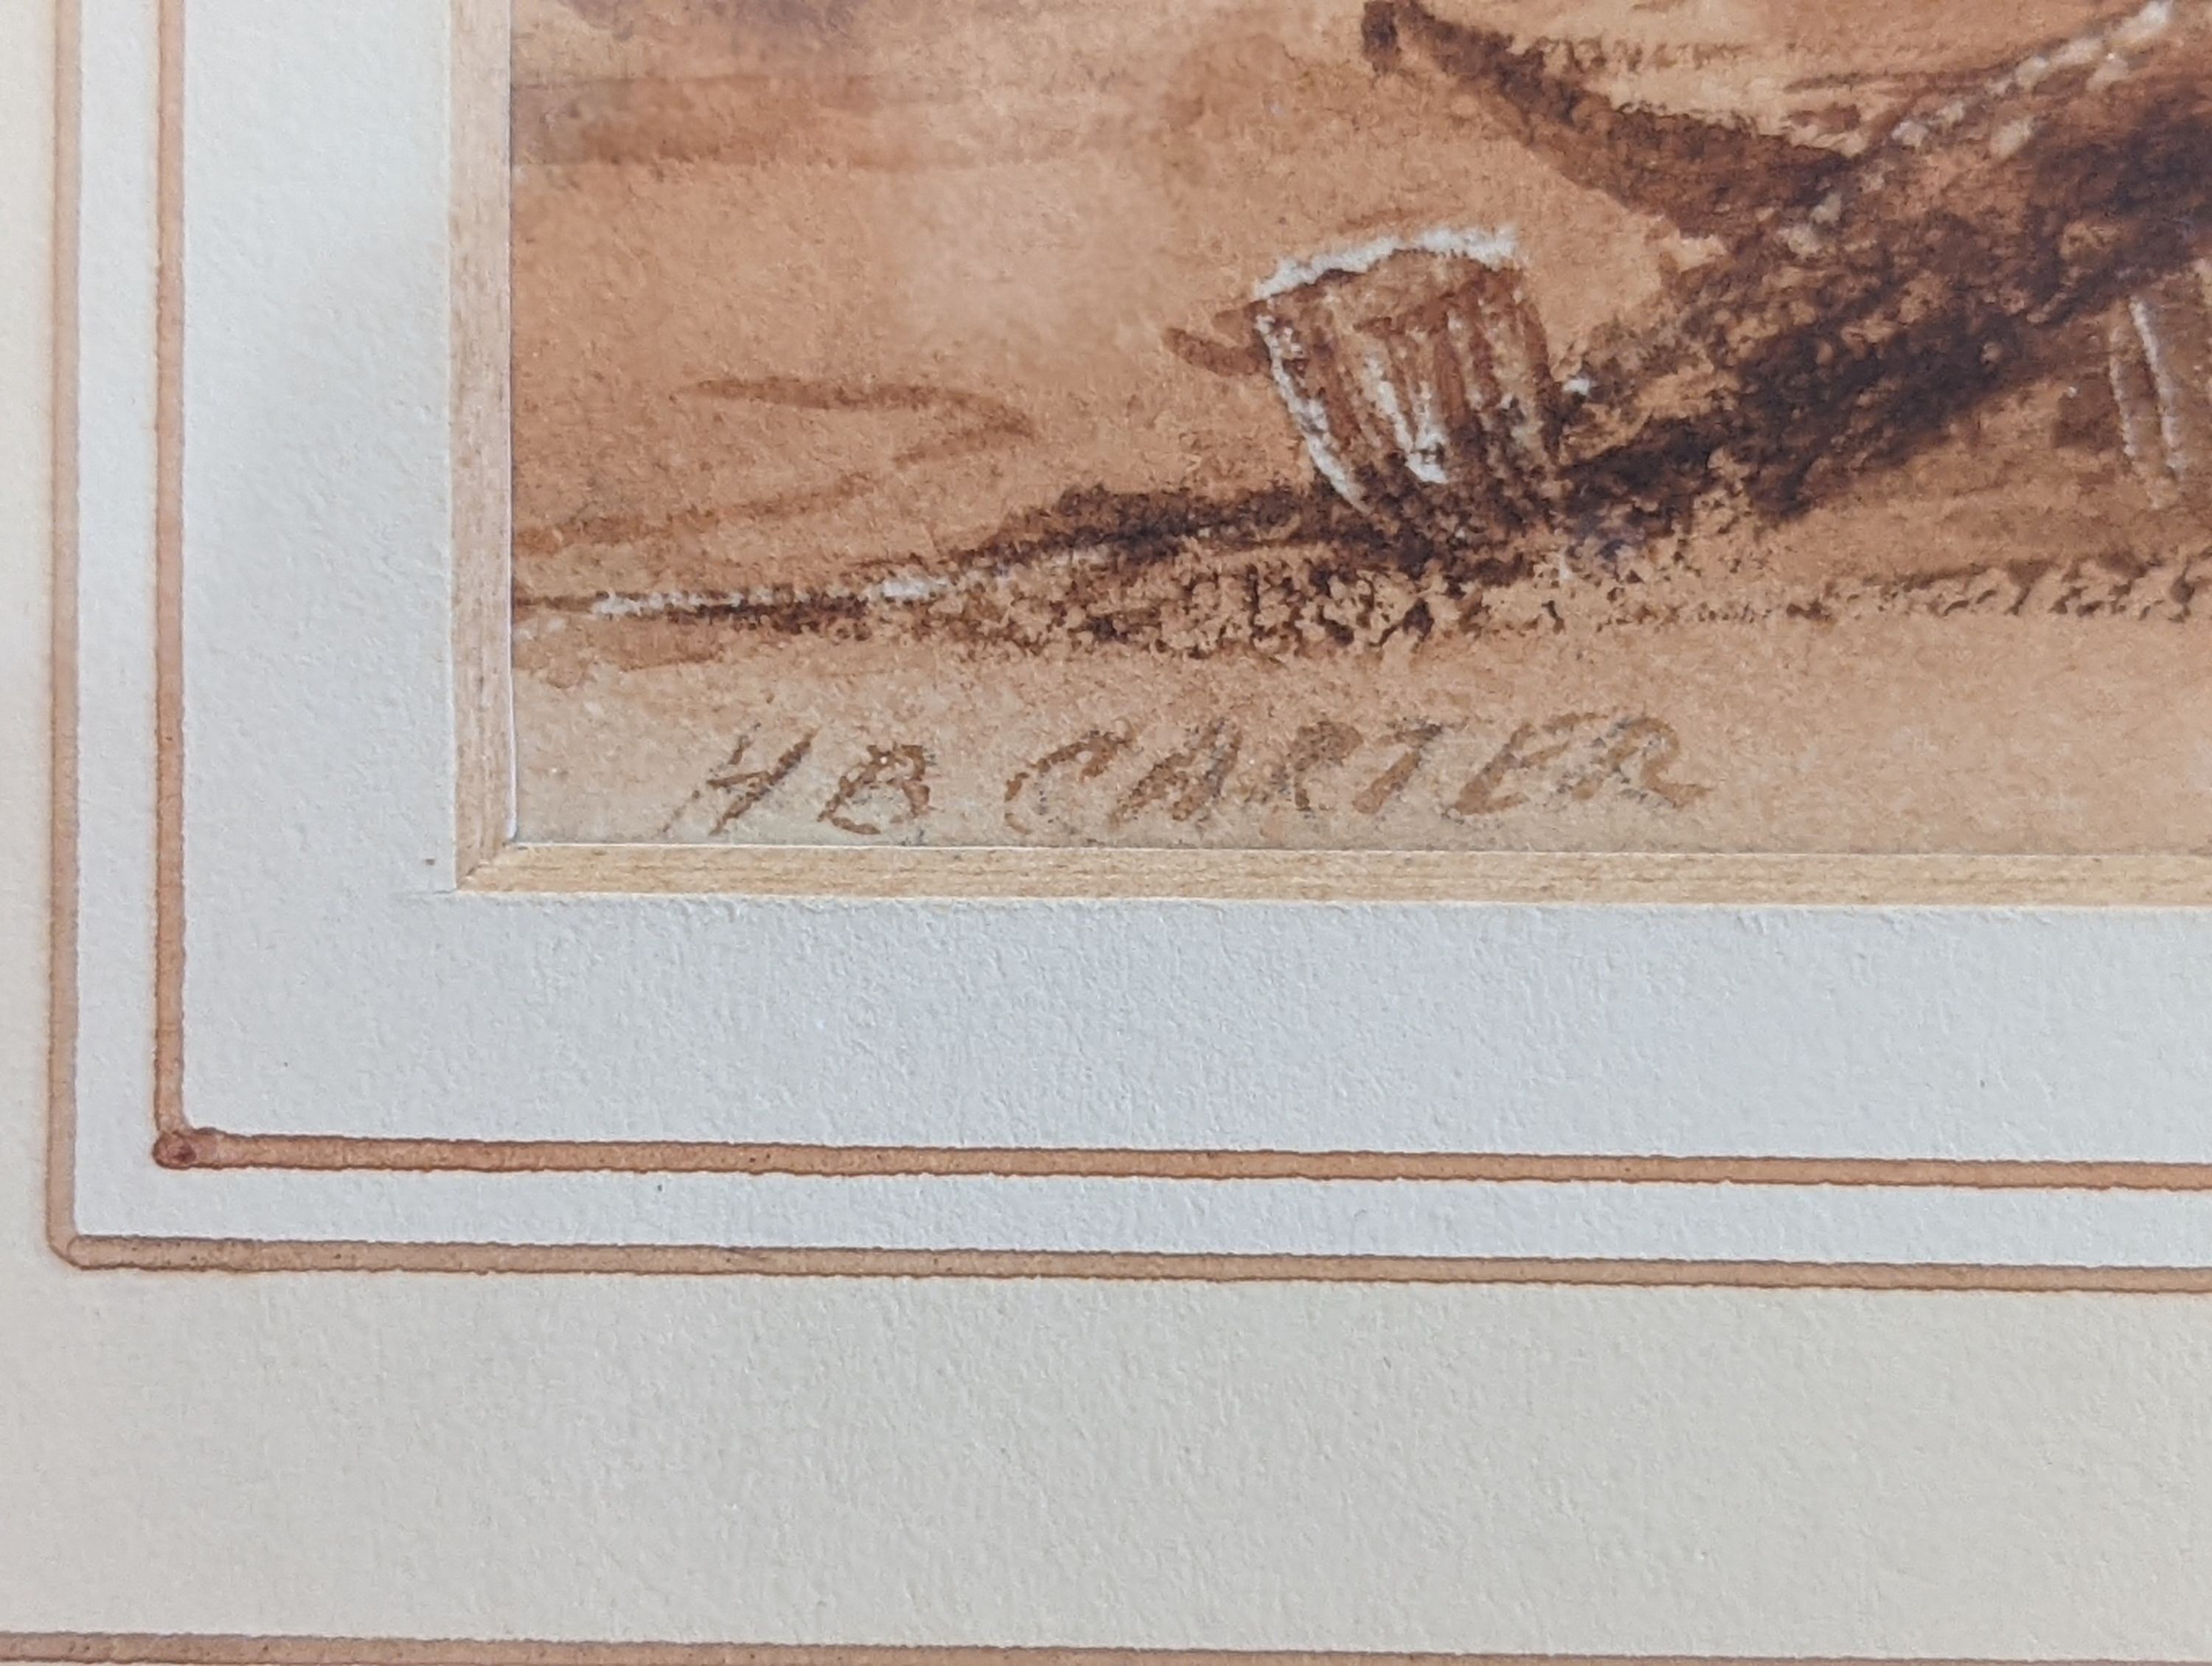 Henry Barlow Carter, (1803-1867), ‘Sailing Vessel on a Beach’, framed sepia watercolour, signed. 11x16cm